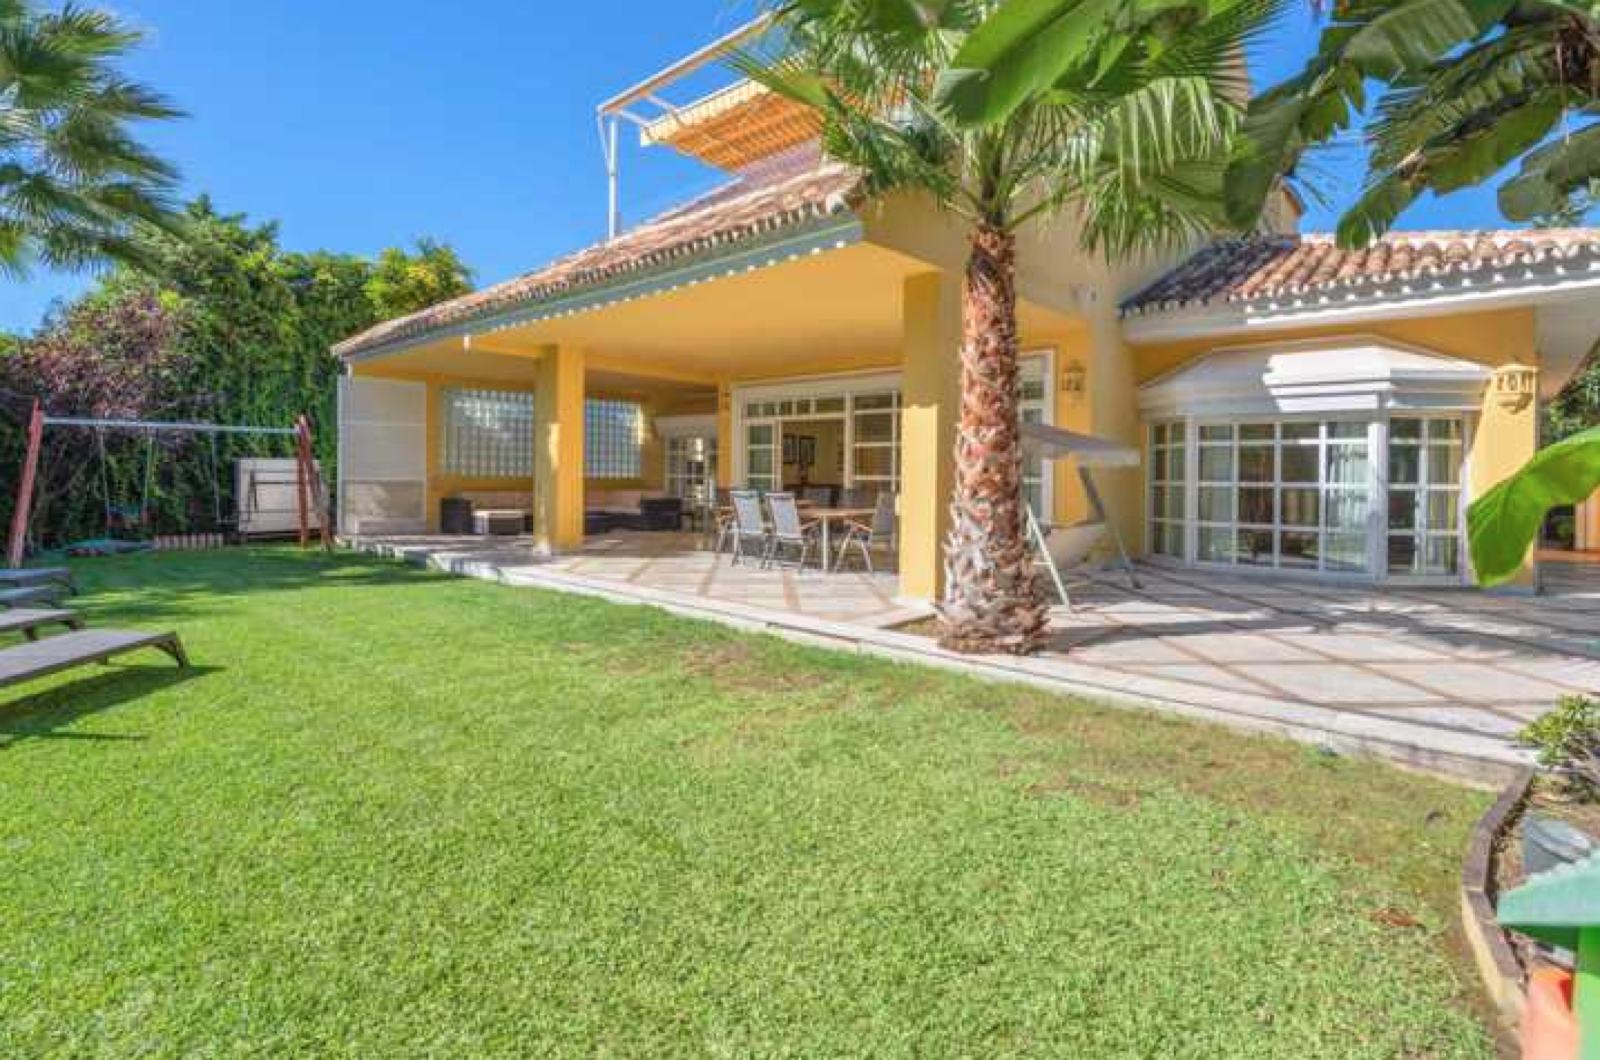 Lovely villa walking distance to amenities and the beach in Guadalmina Baja